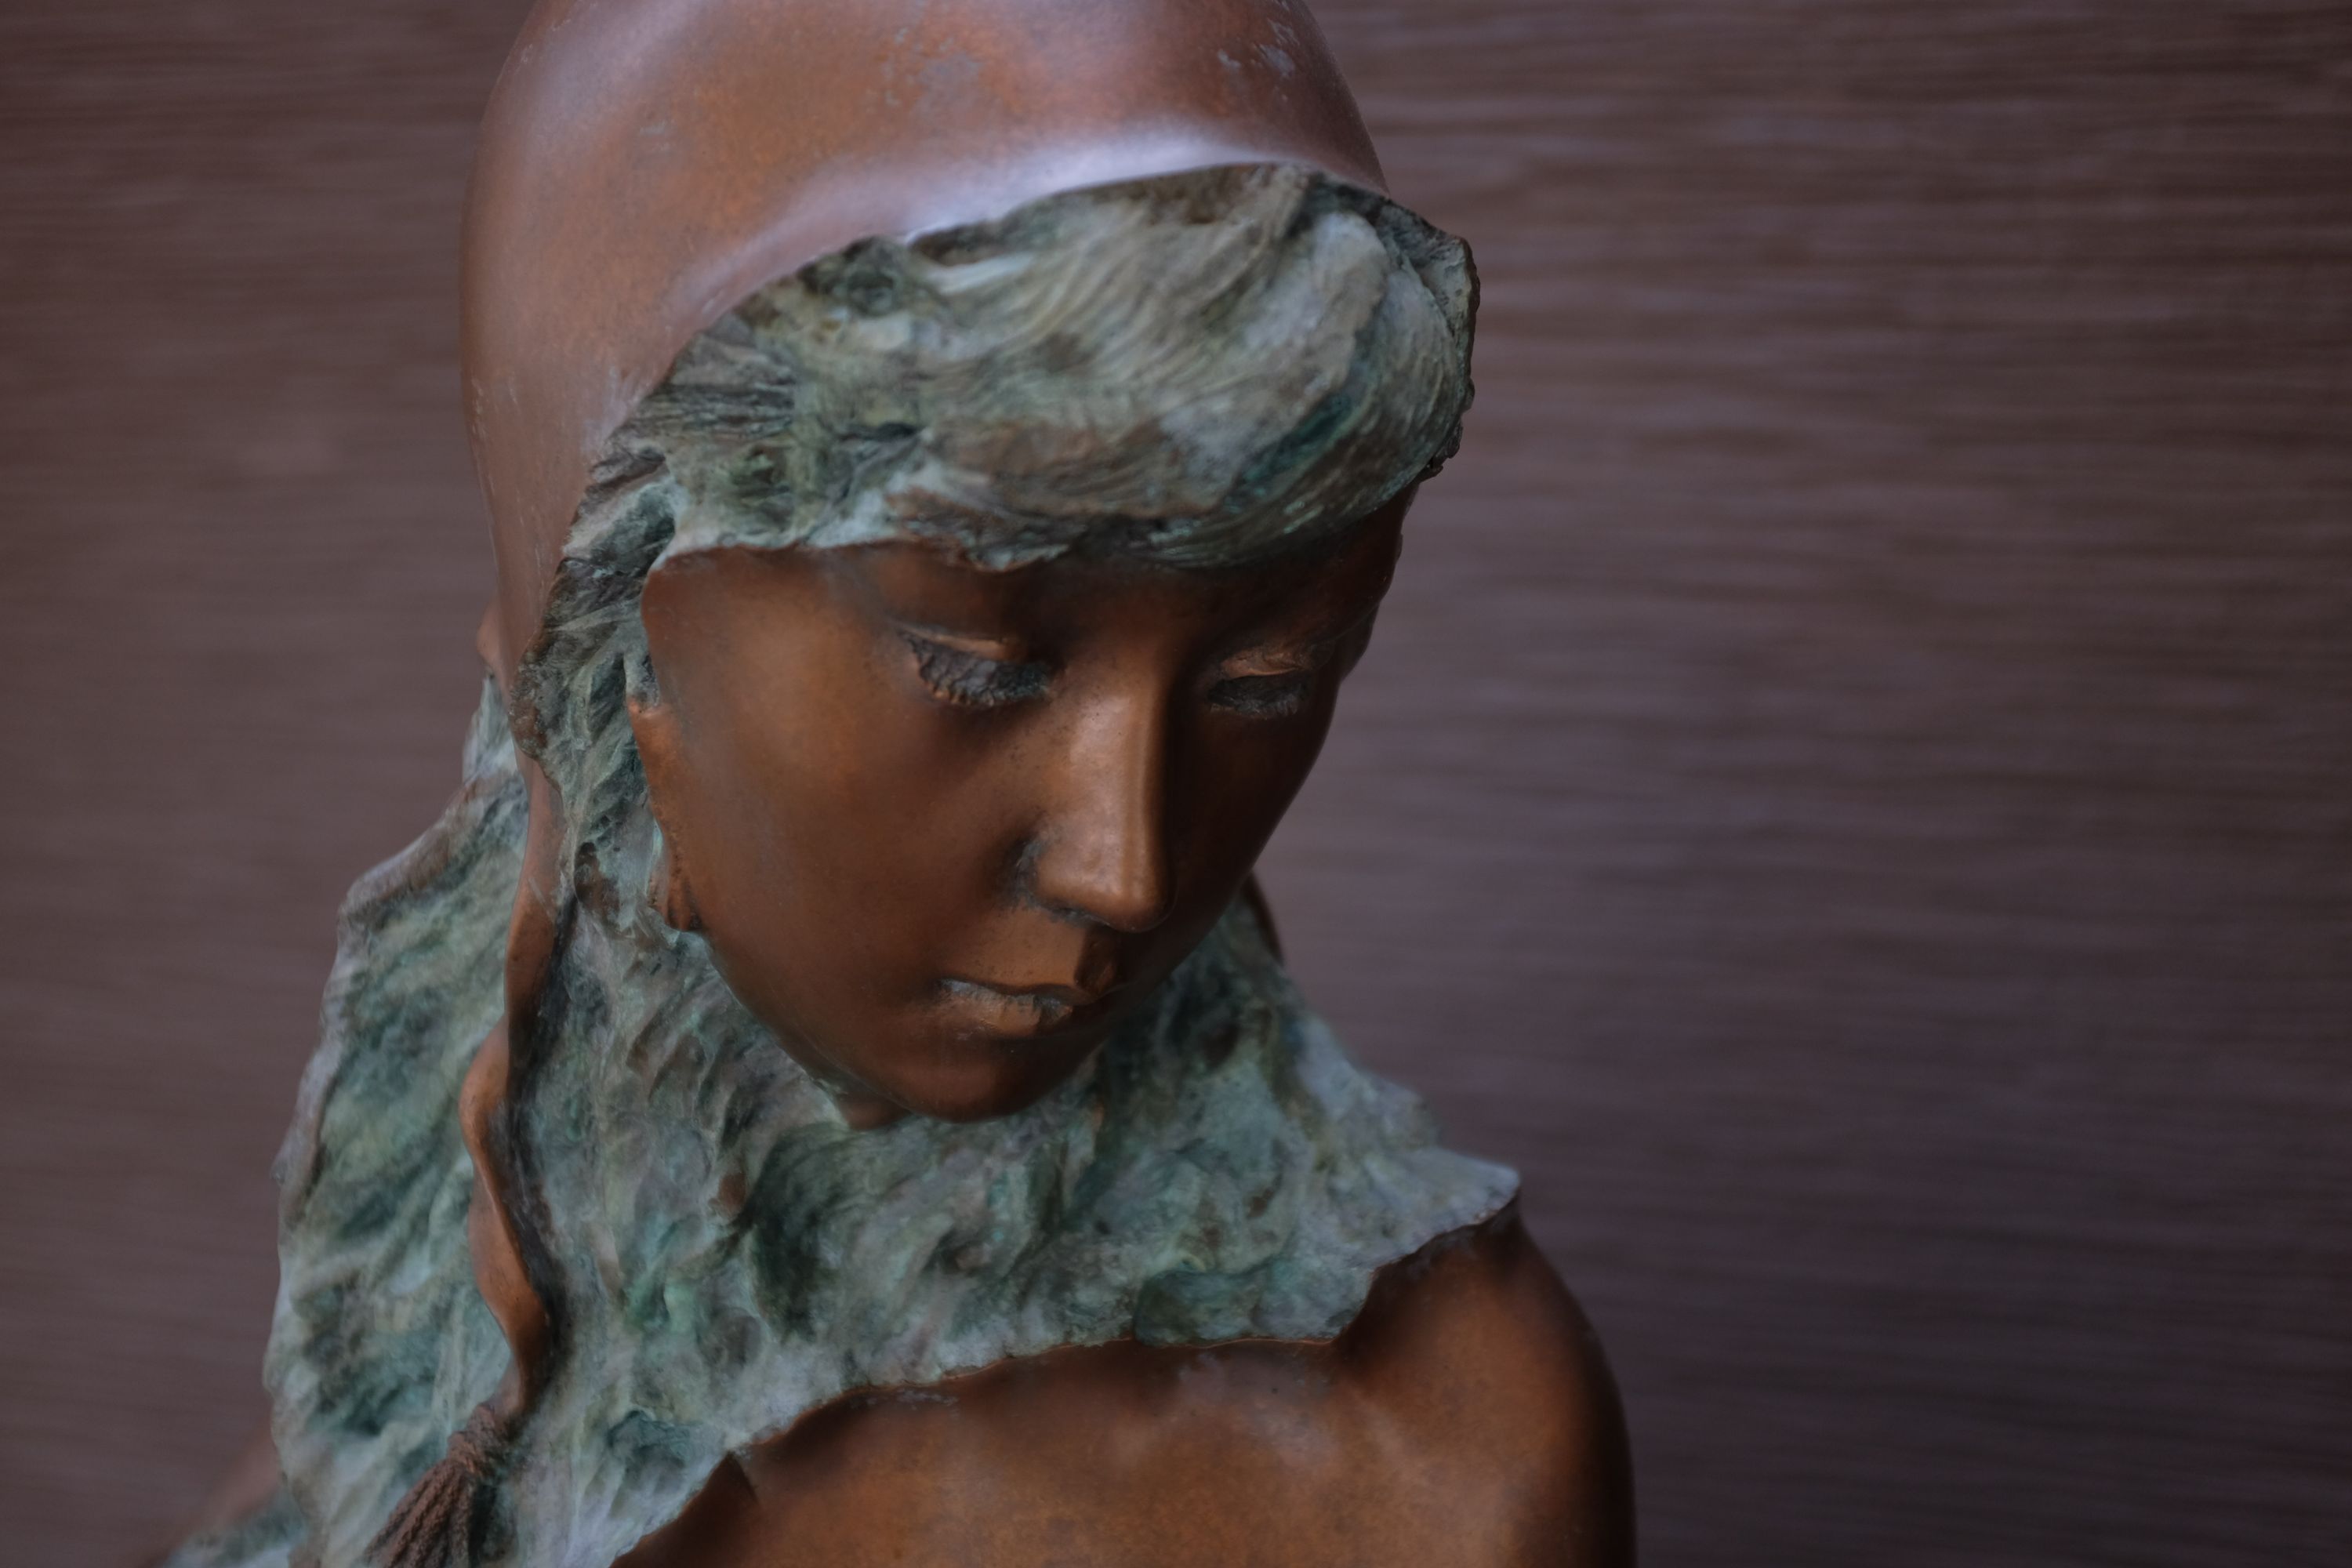 The head of a statue of what appears to be a sea fairy.